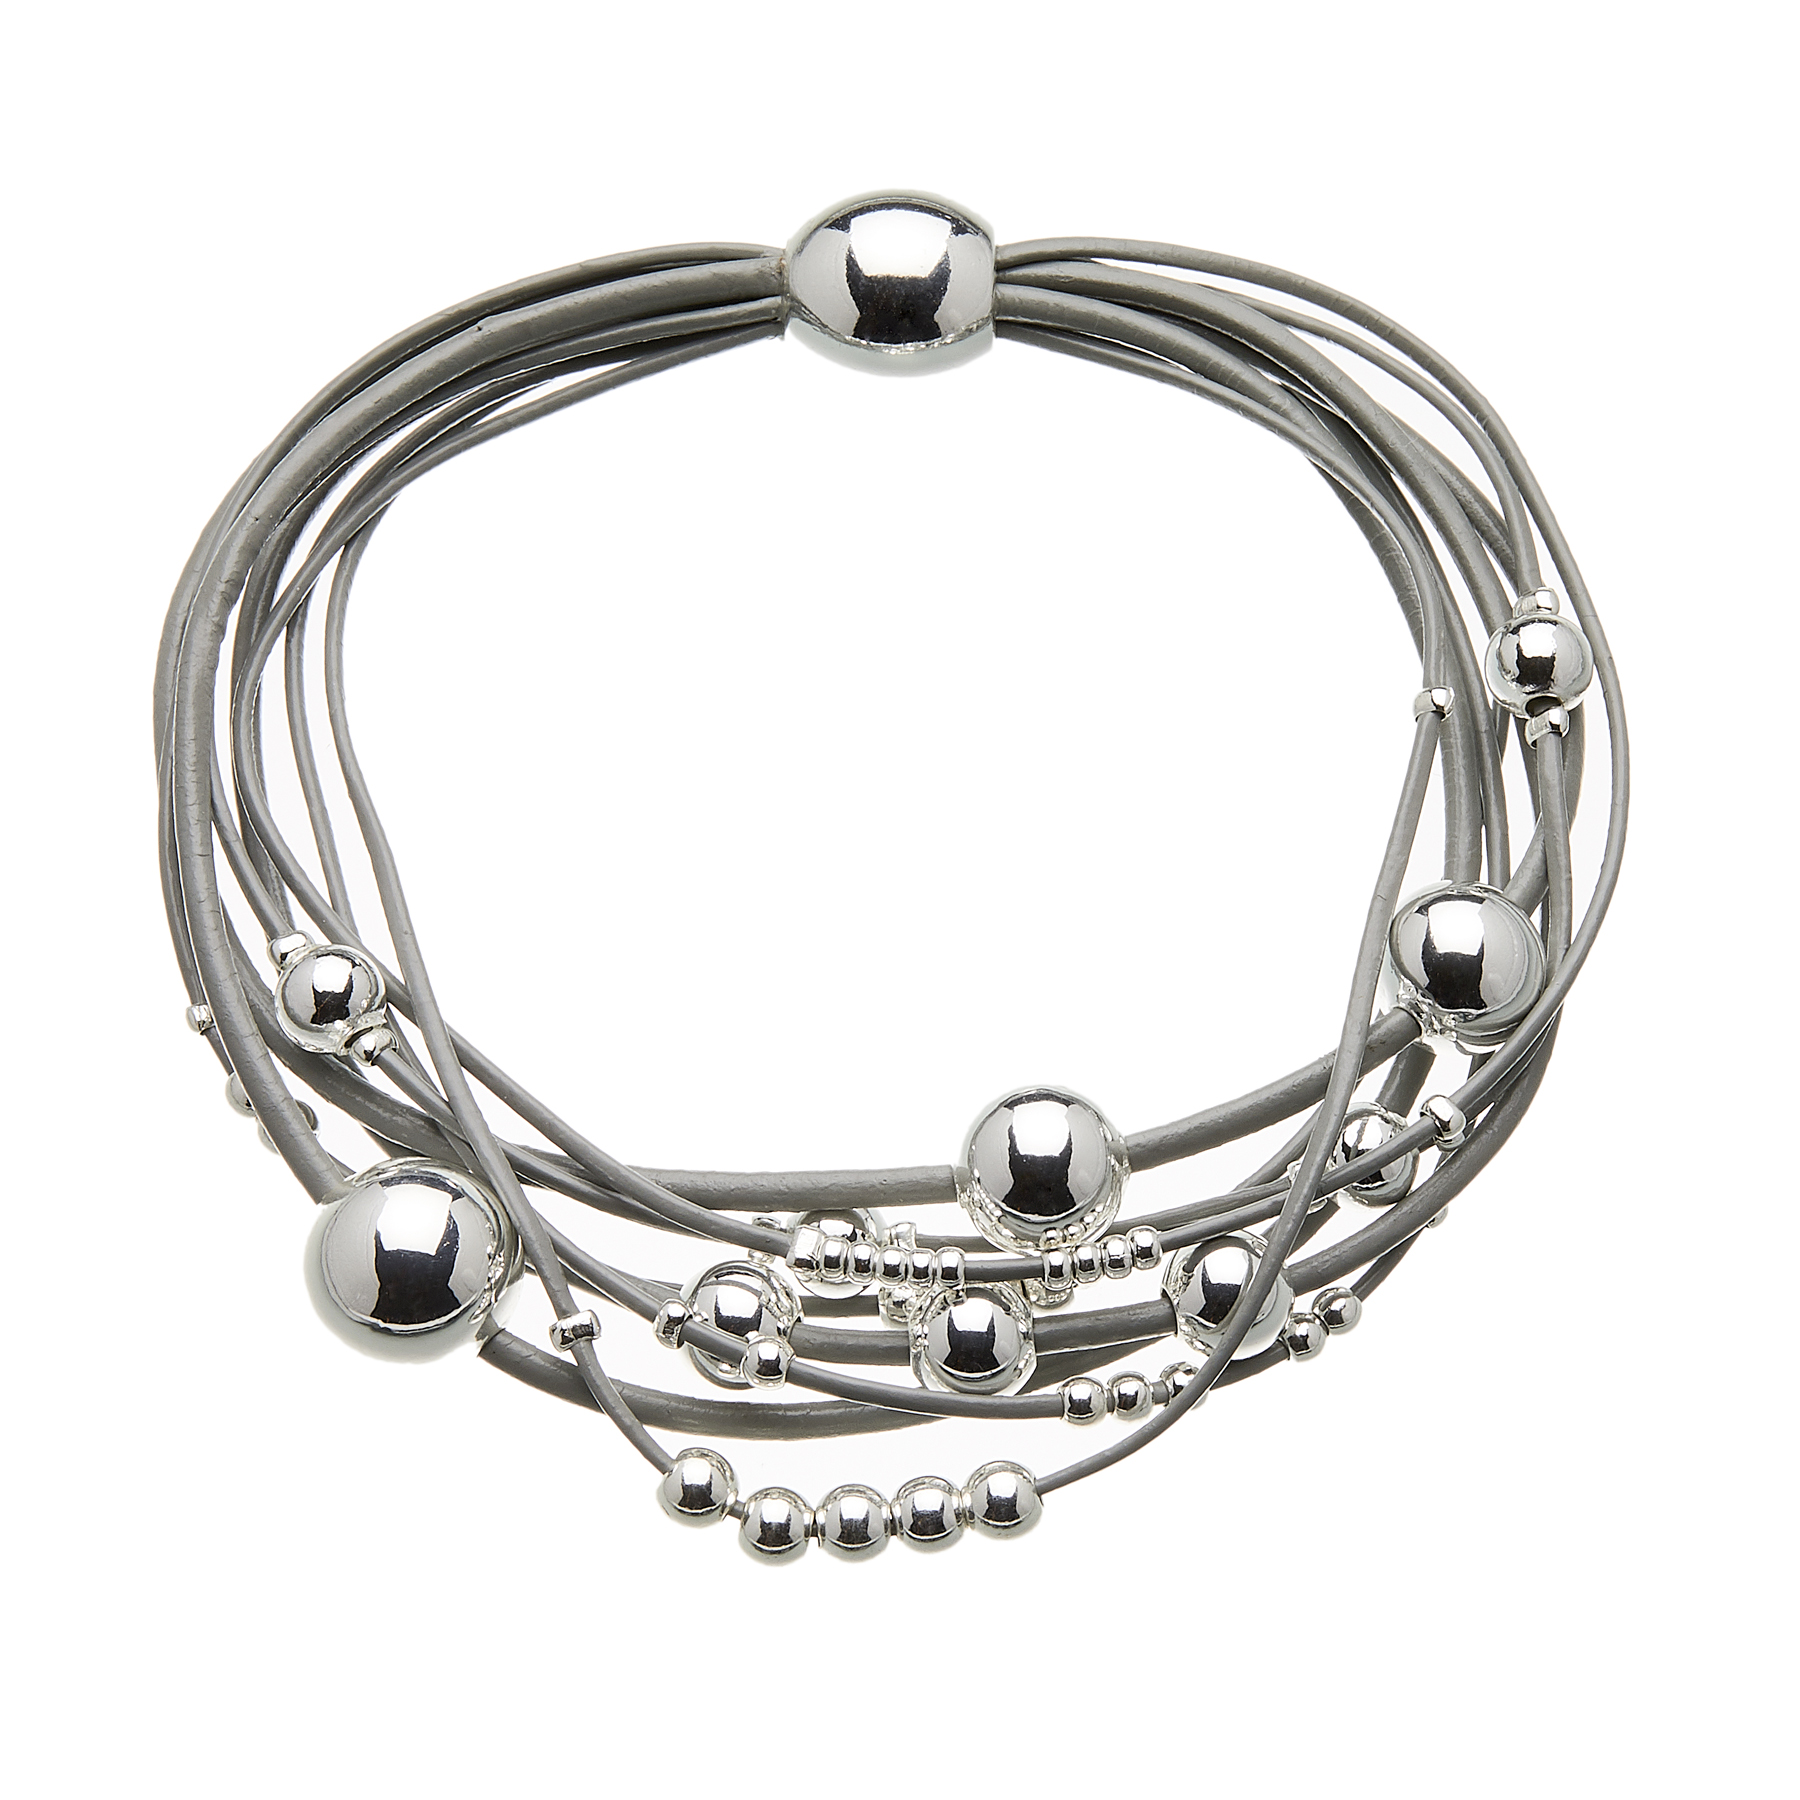 Bracelet with grey leather strands and sliding silver beads - Ruth S